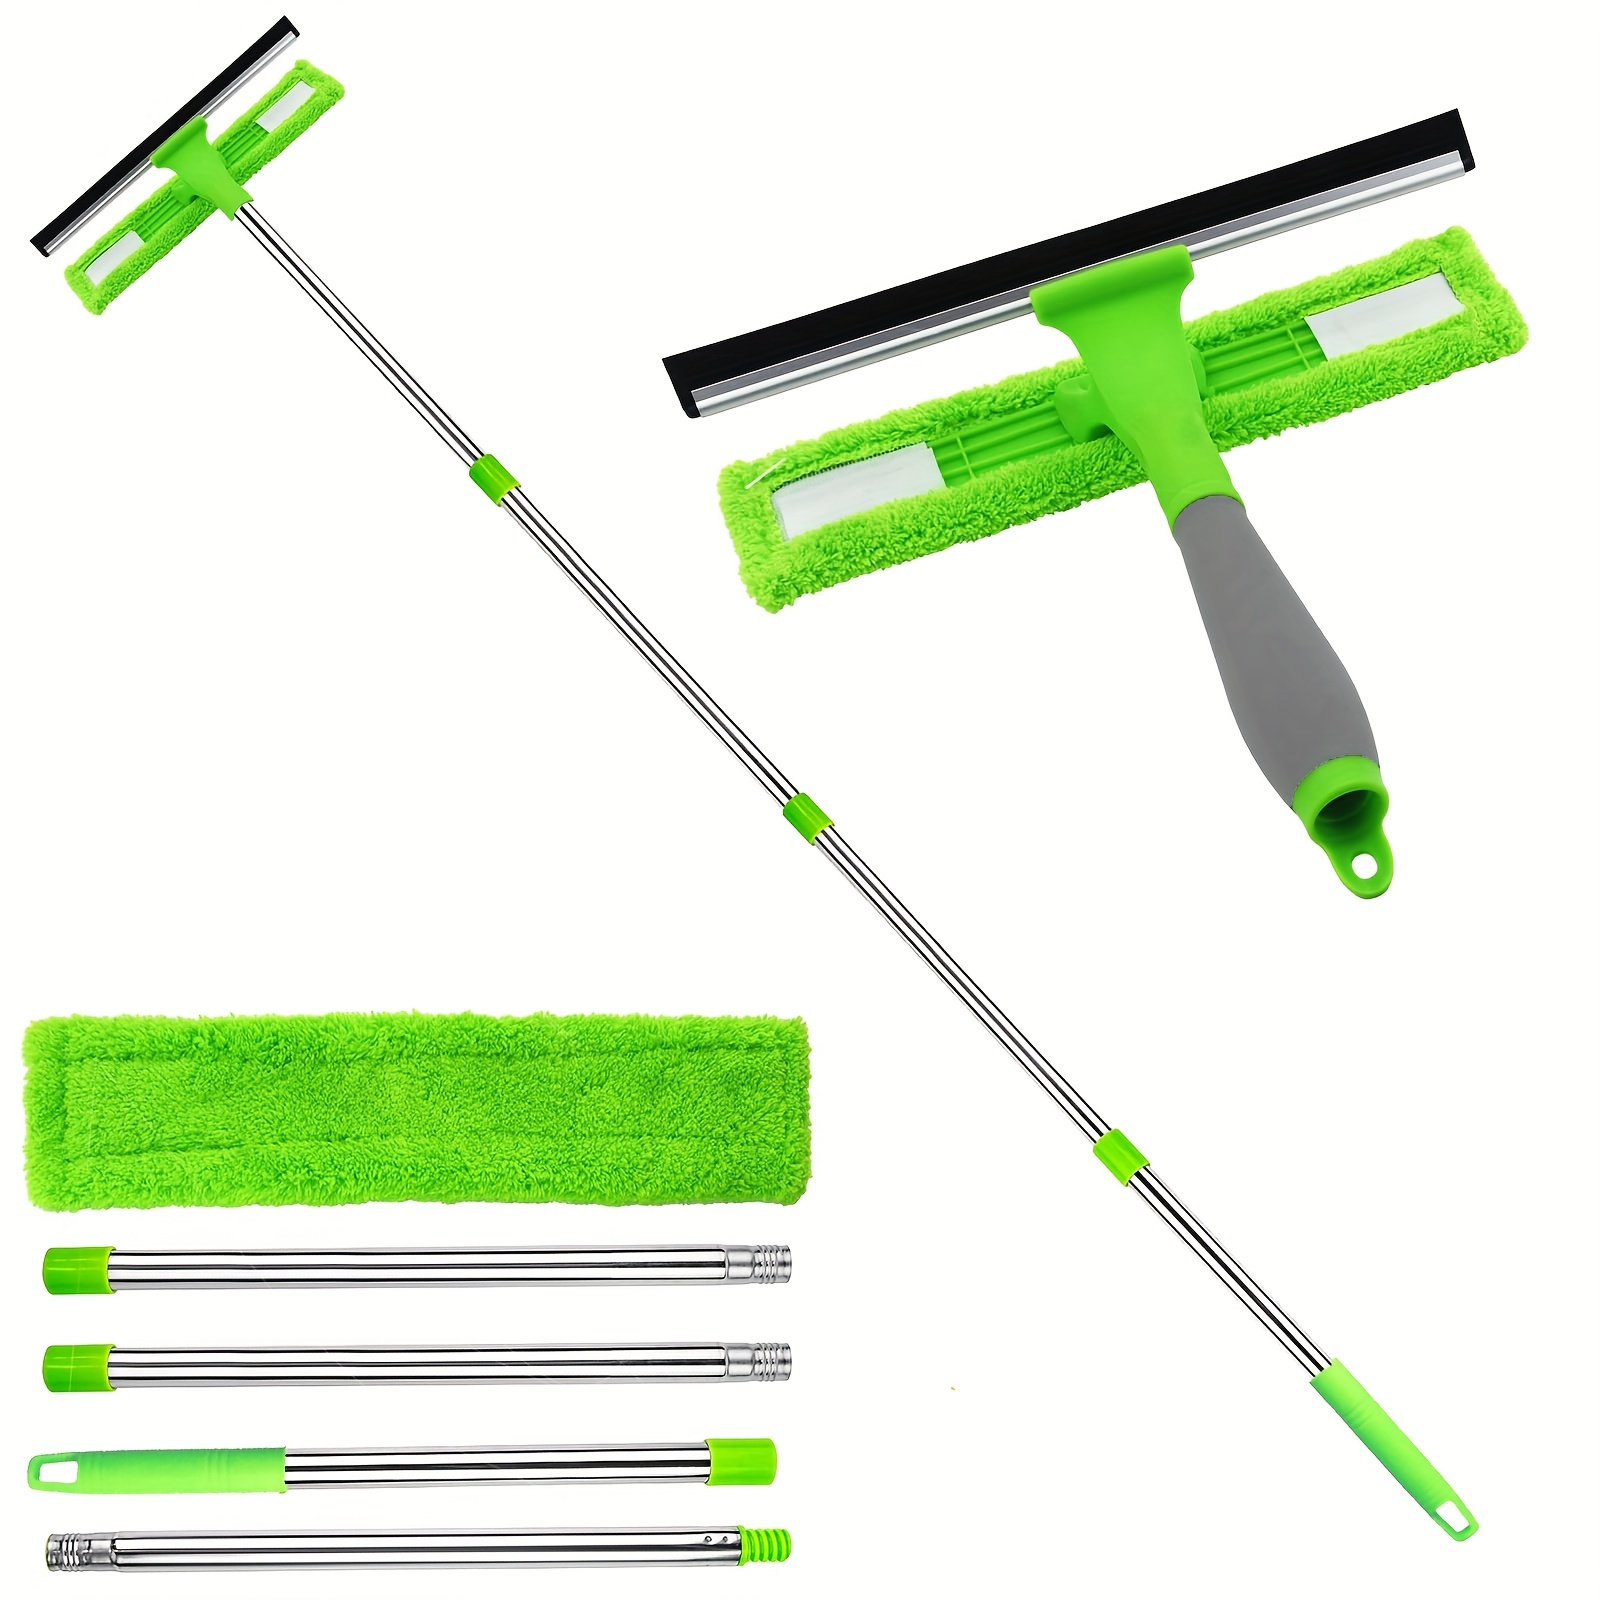 Window Squeegee 2-in-1 Cleaning Tool, Extension Pole, In/out door, 2 pads